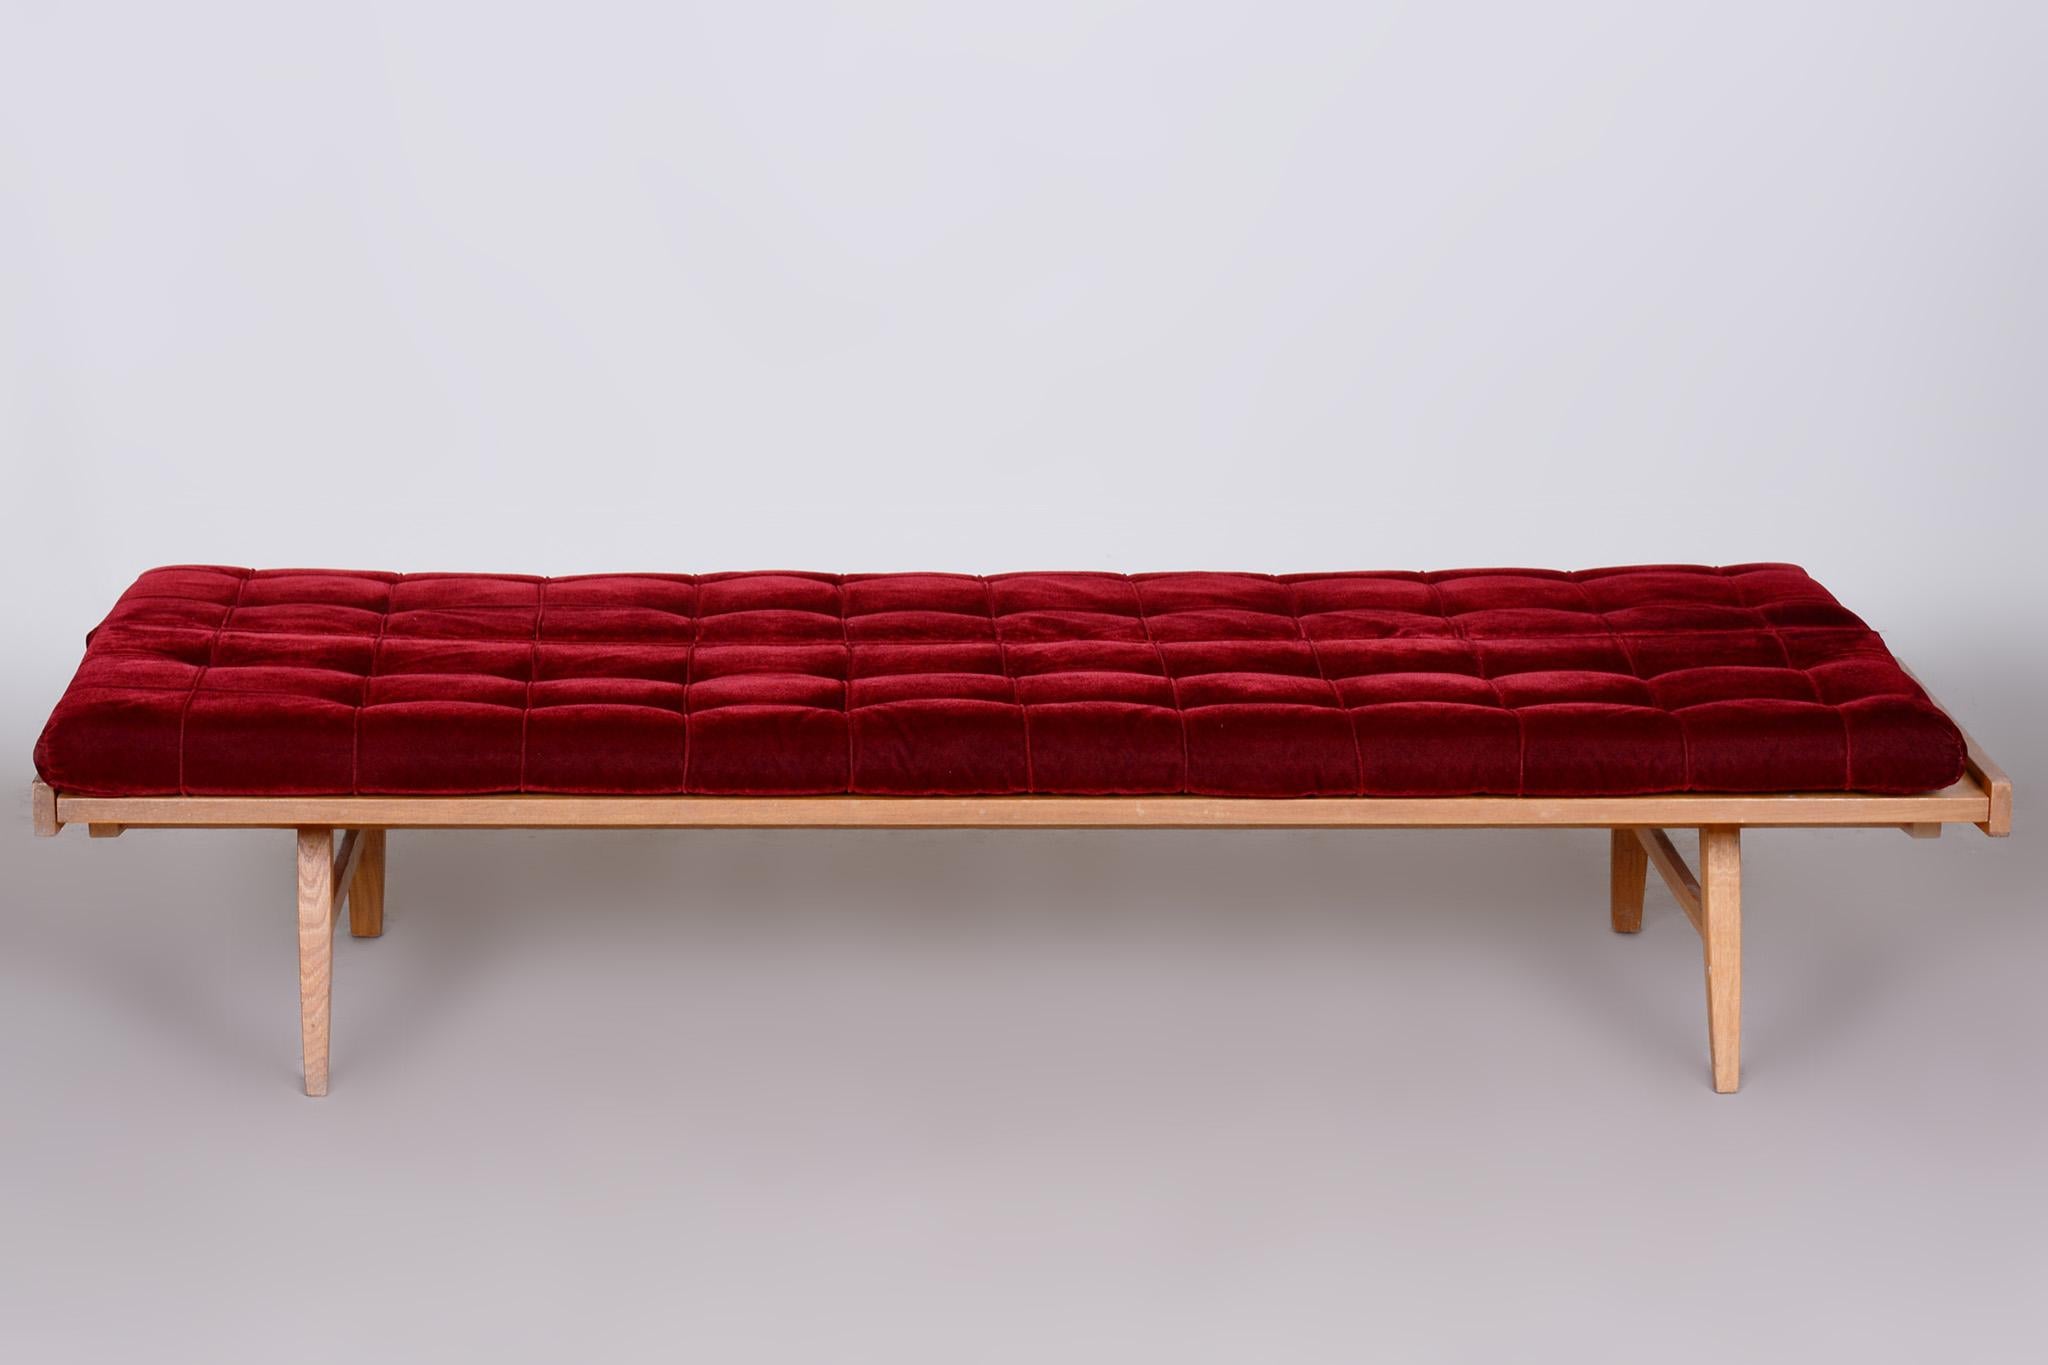 Red Mid-Century Modern Oak Sofa, 1950s, Original Well Preserved Upholstery For Sale 1